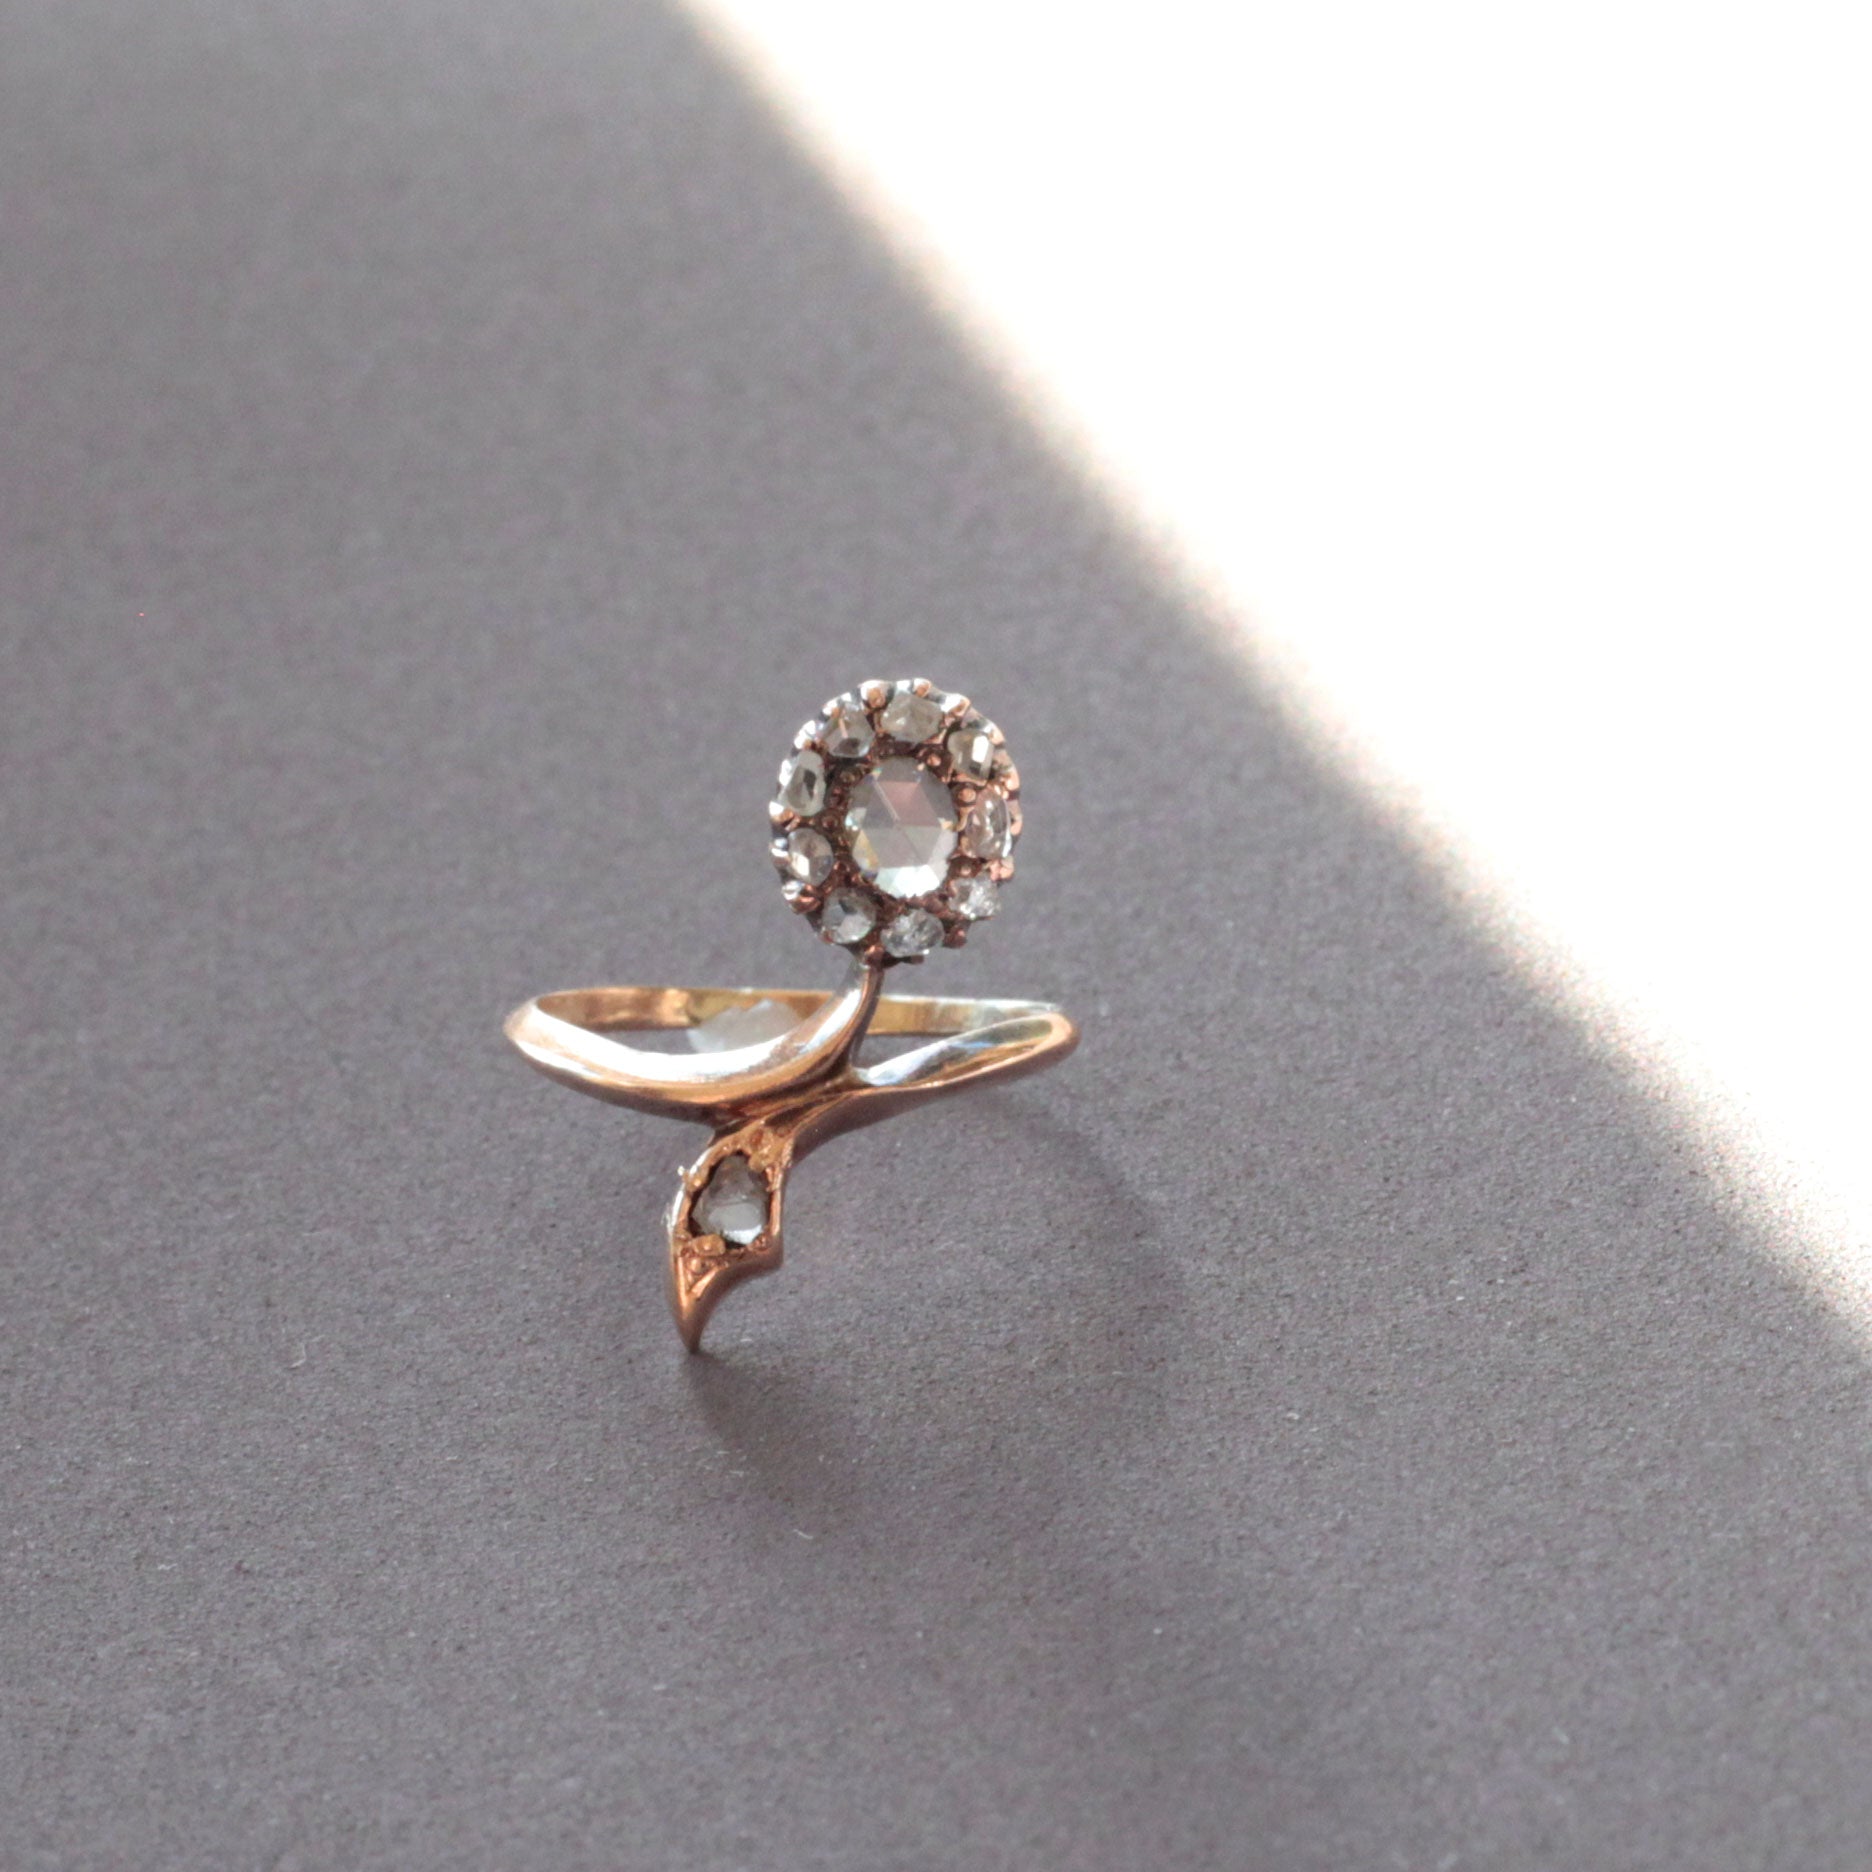 Victorian Rose Cut Diamond And 14k Gold Ring